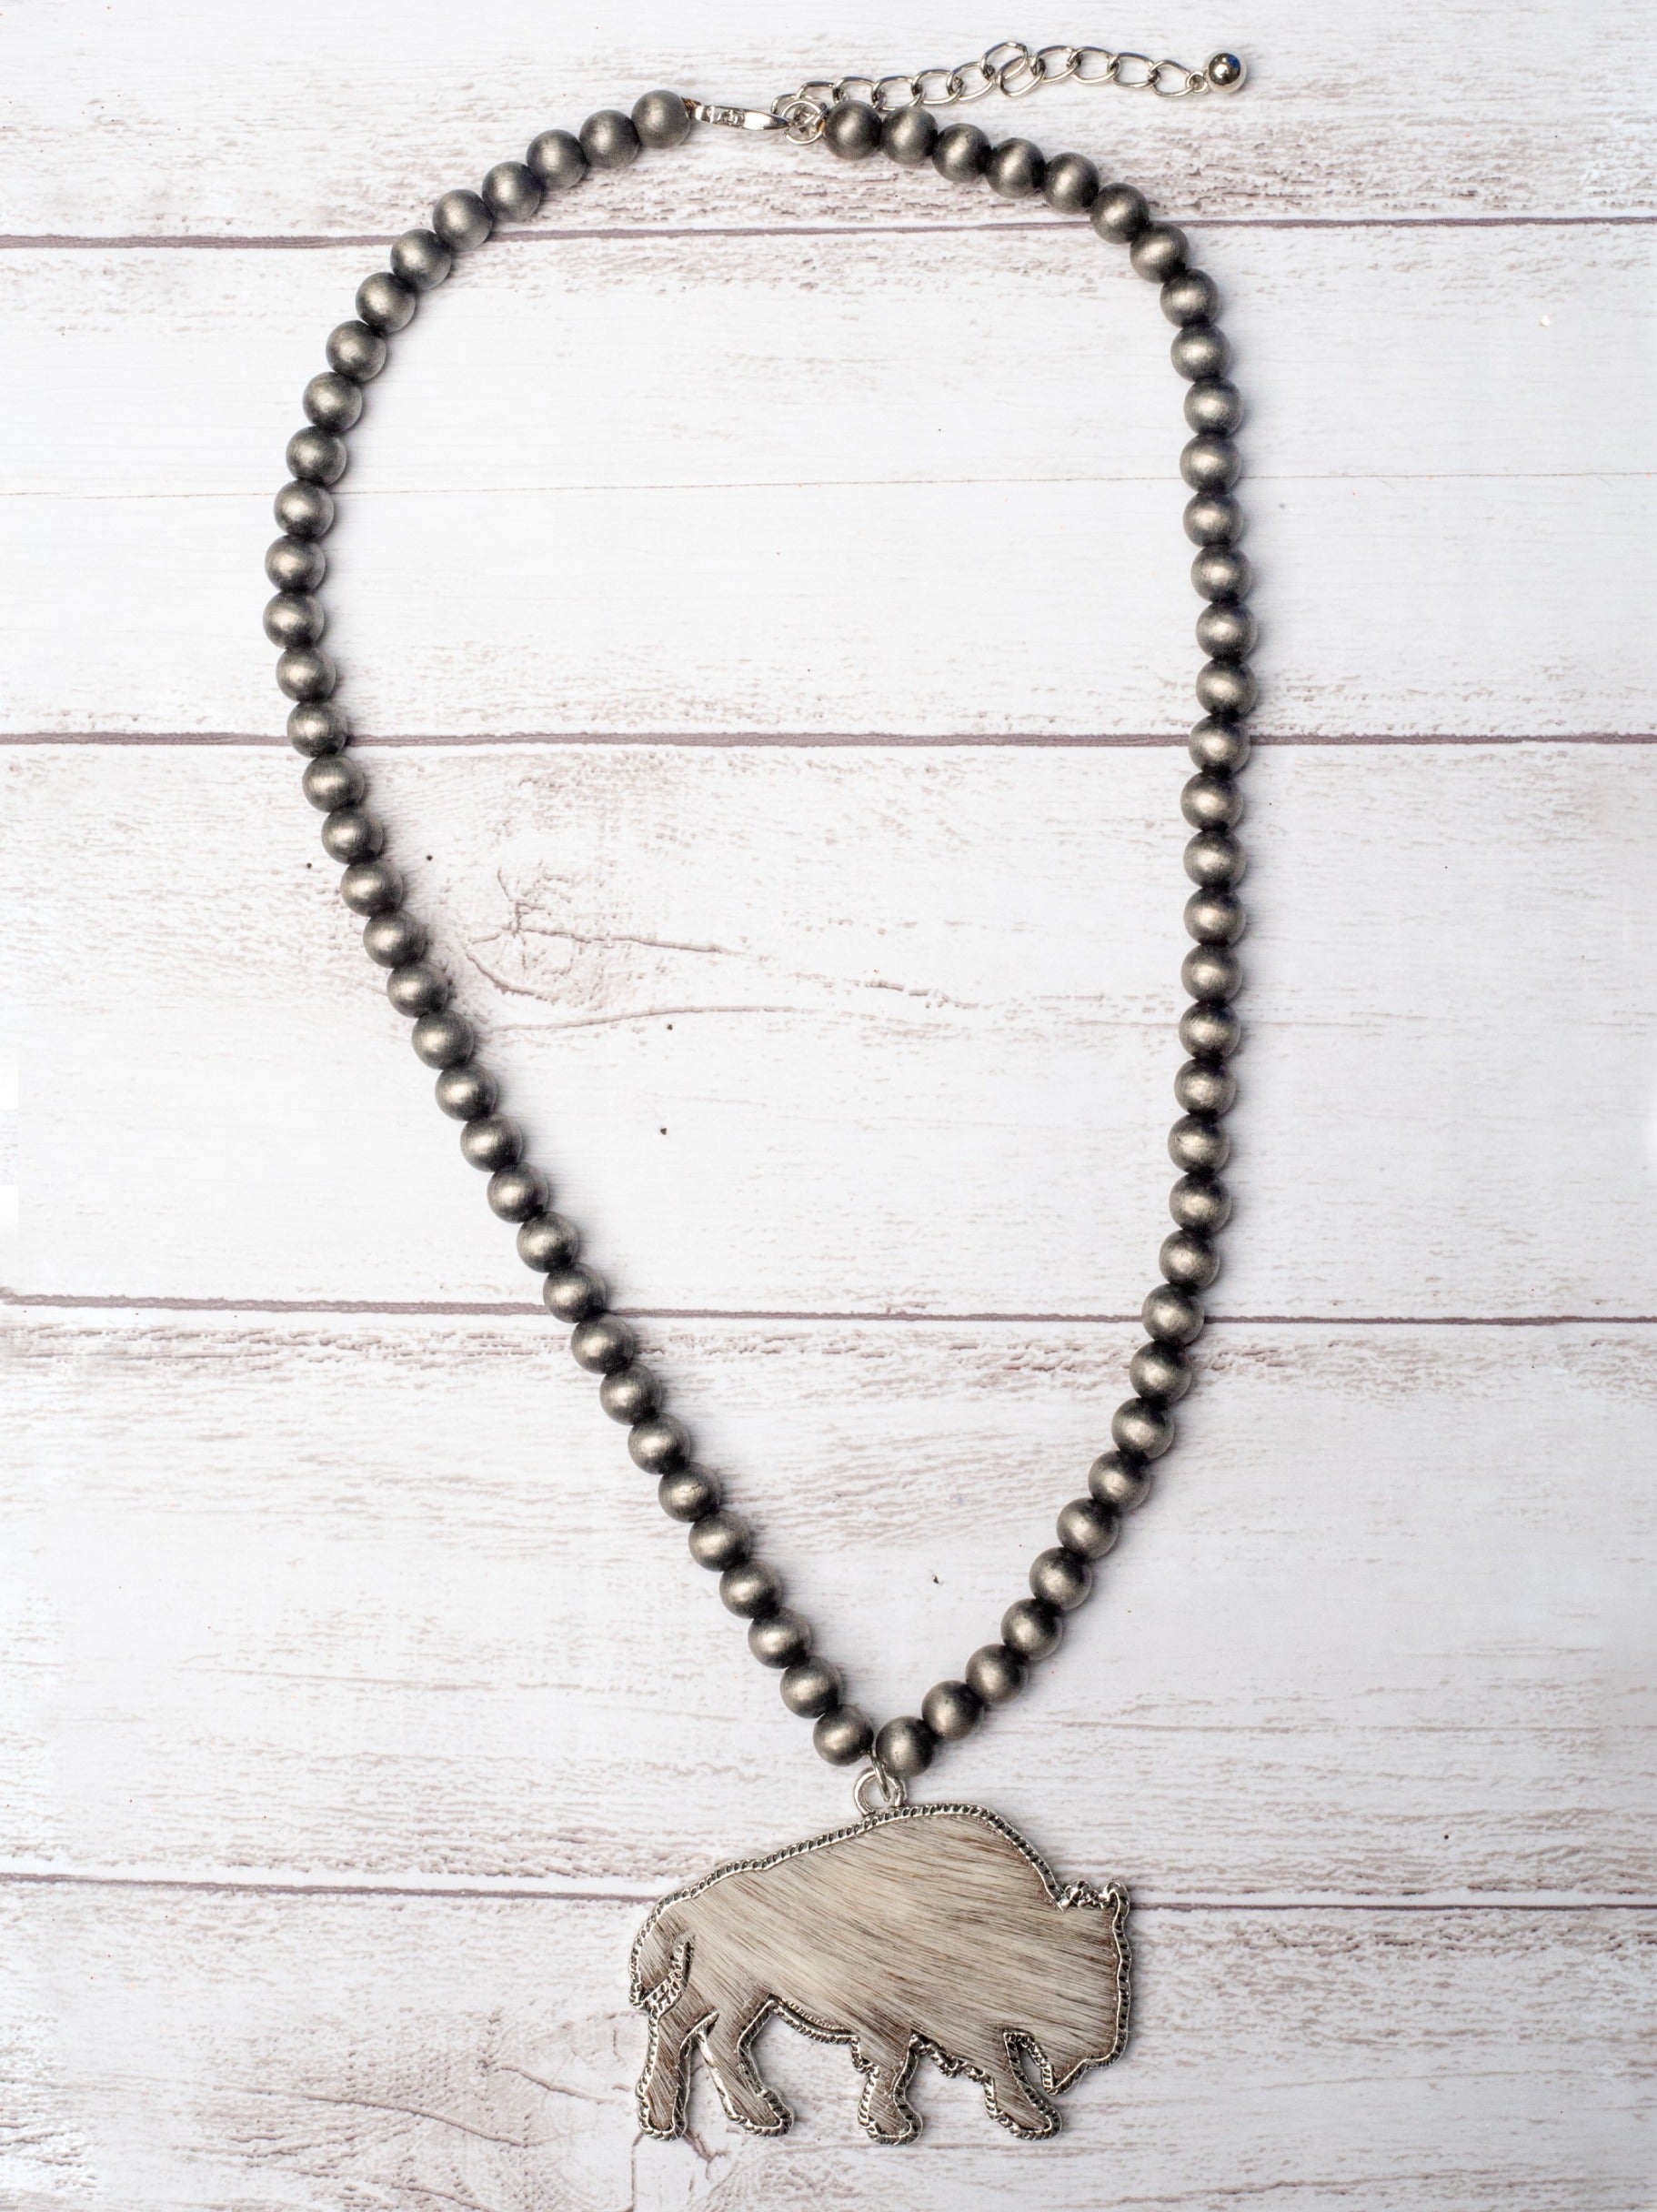 GONE RANCHIN' WHITE COWHIDE BISON PENDANT NAVAJO PEARL NECKLACE